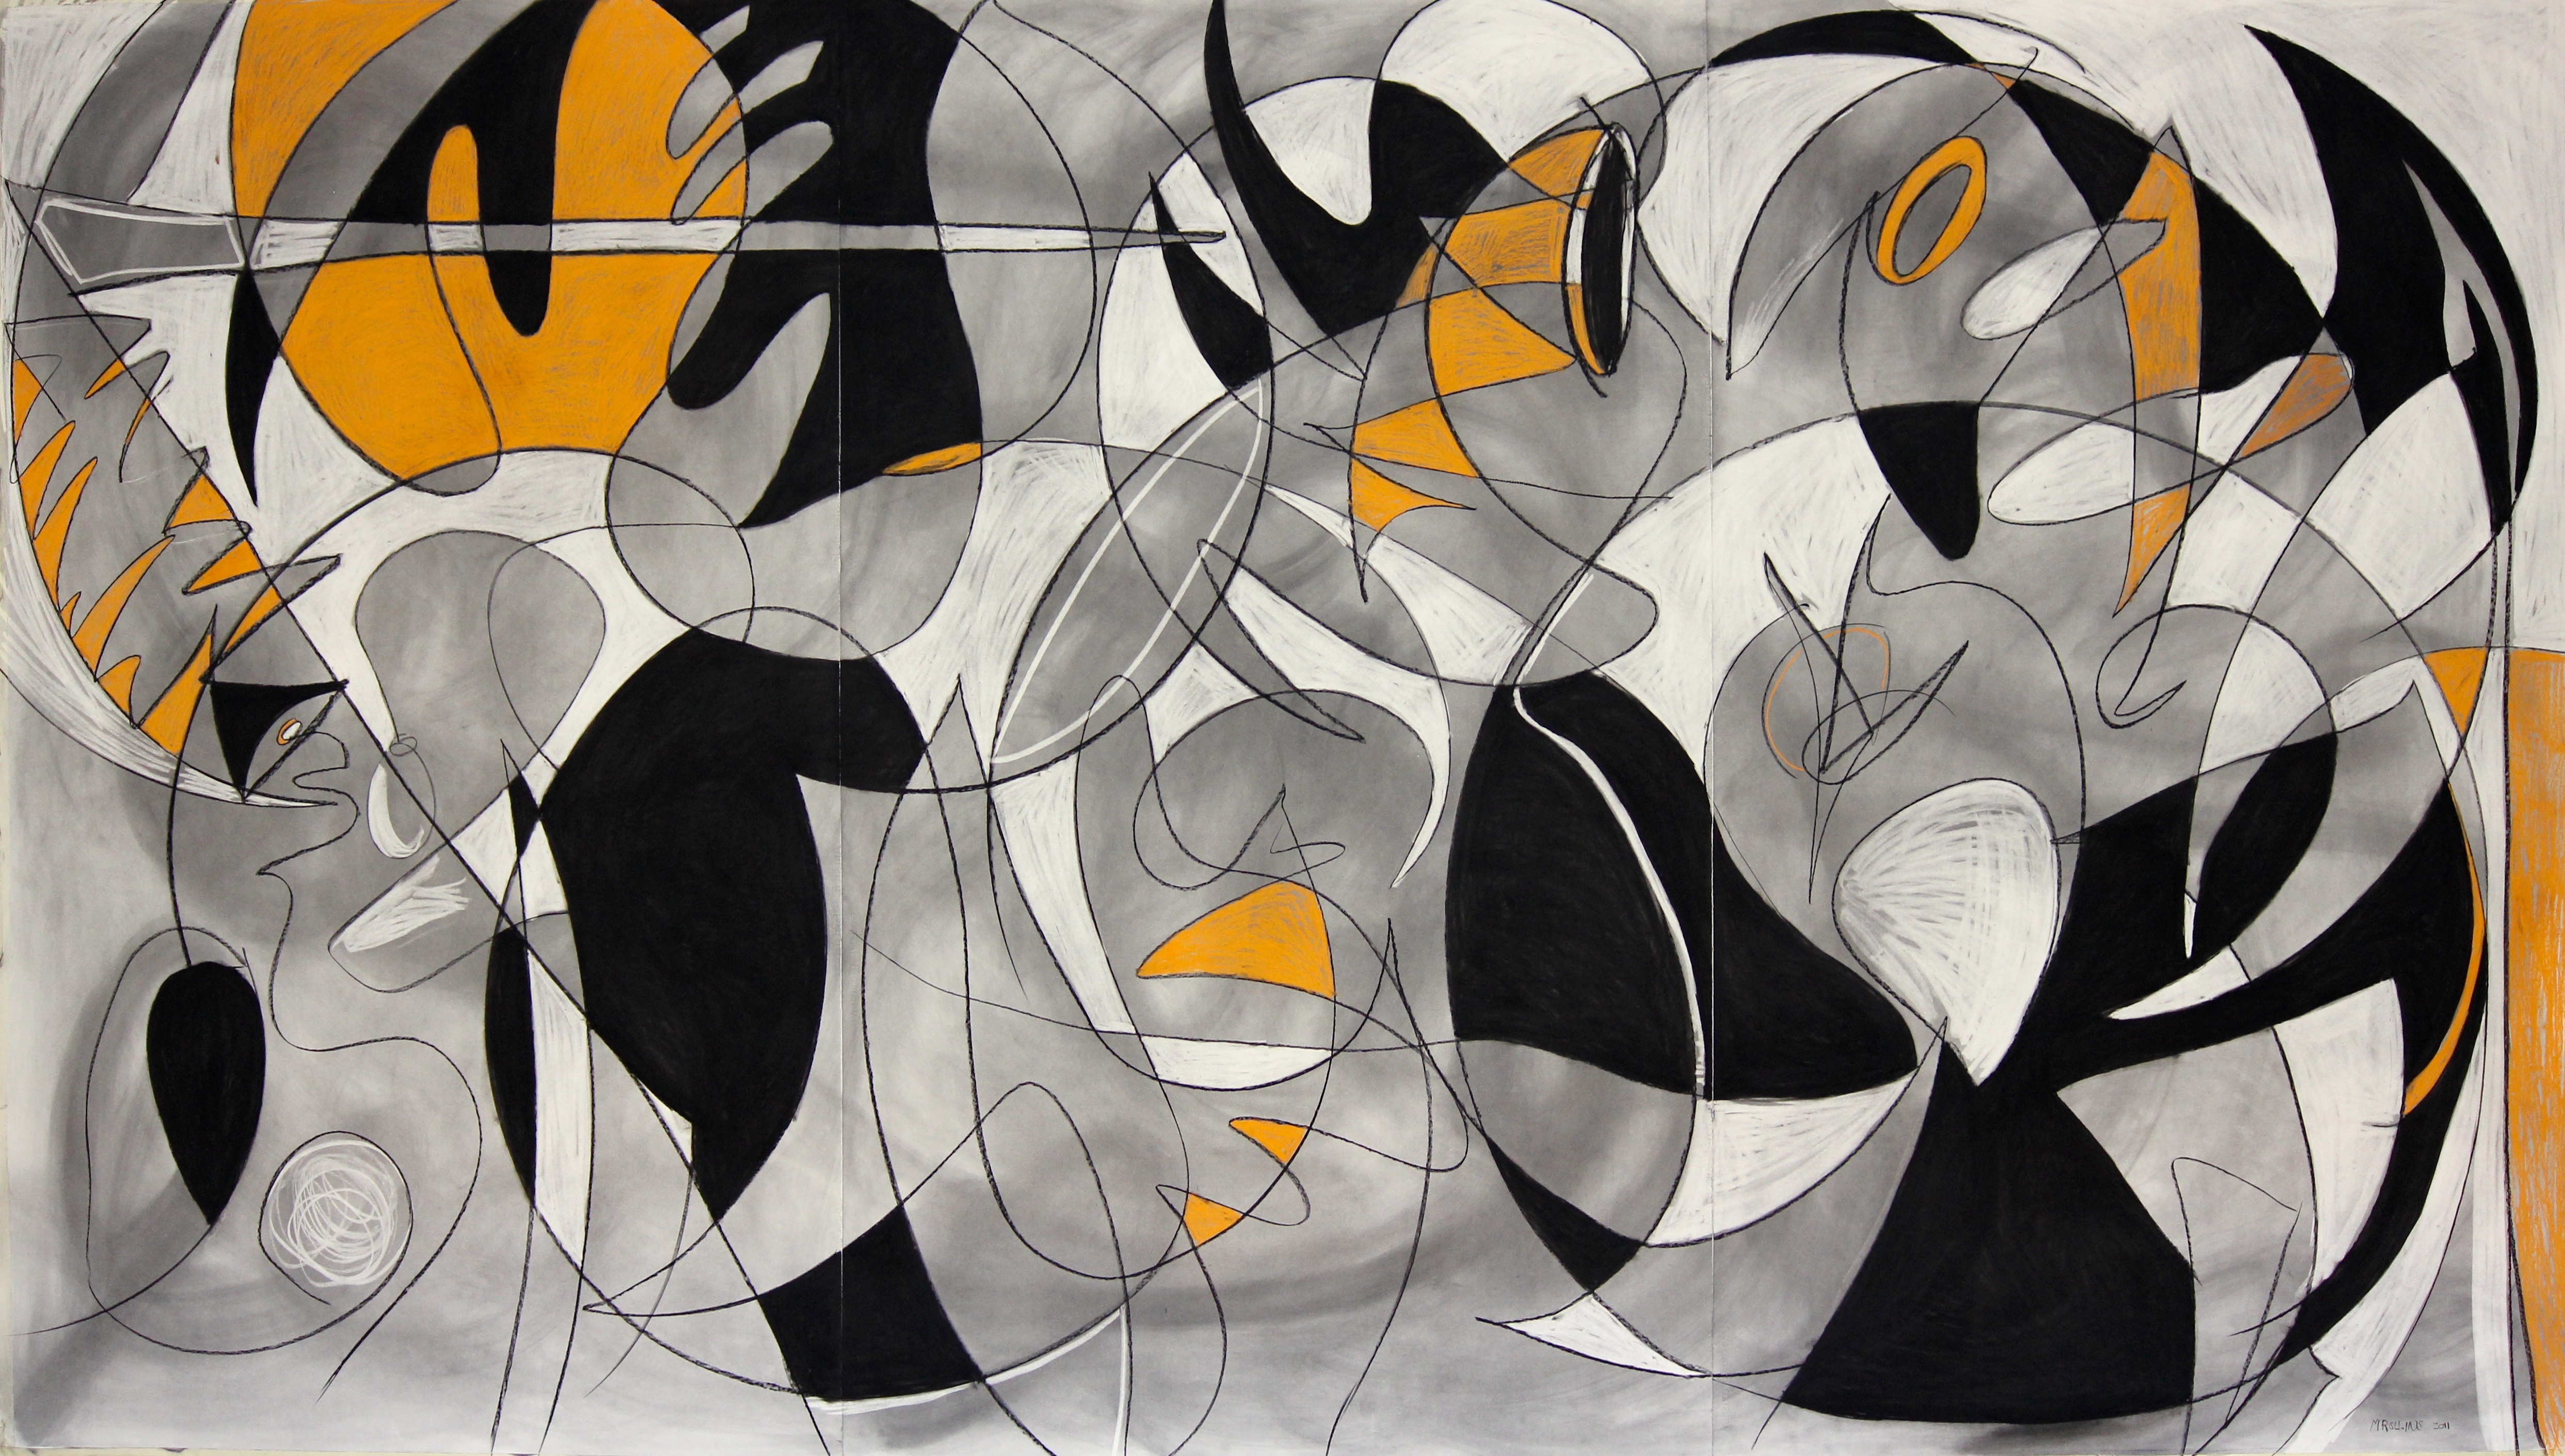 Wheel Drawing, 2011, 240cm x 420cm, 94 x 165inches,charcoal and conte crayon on paper, 2011